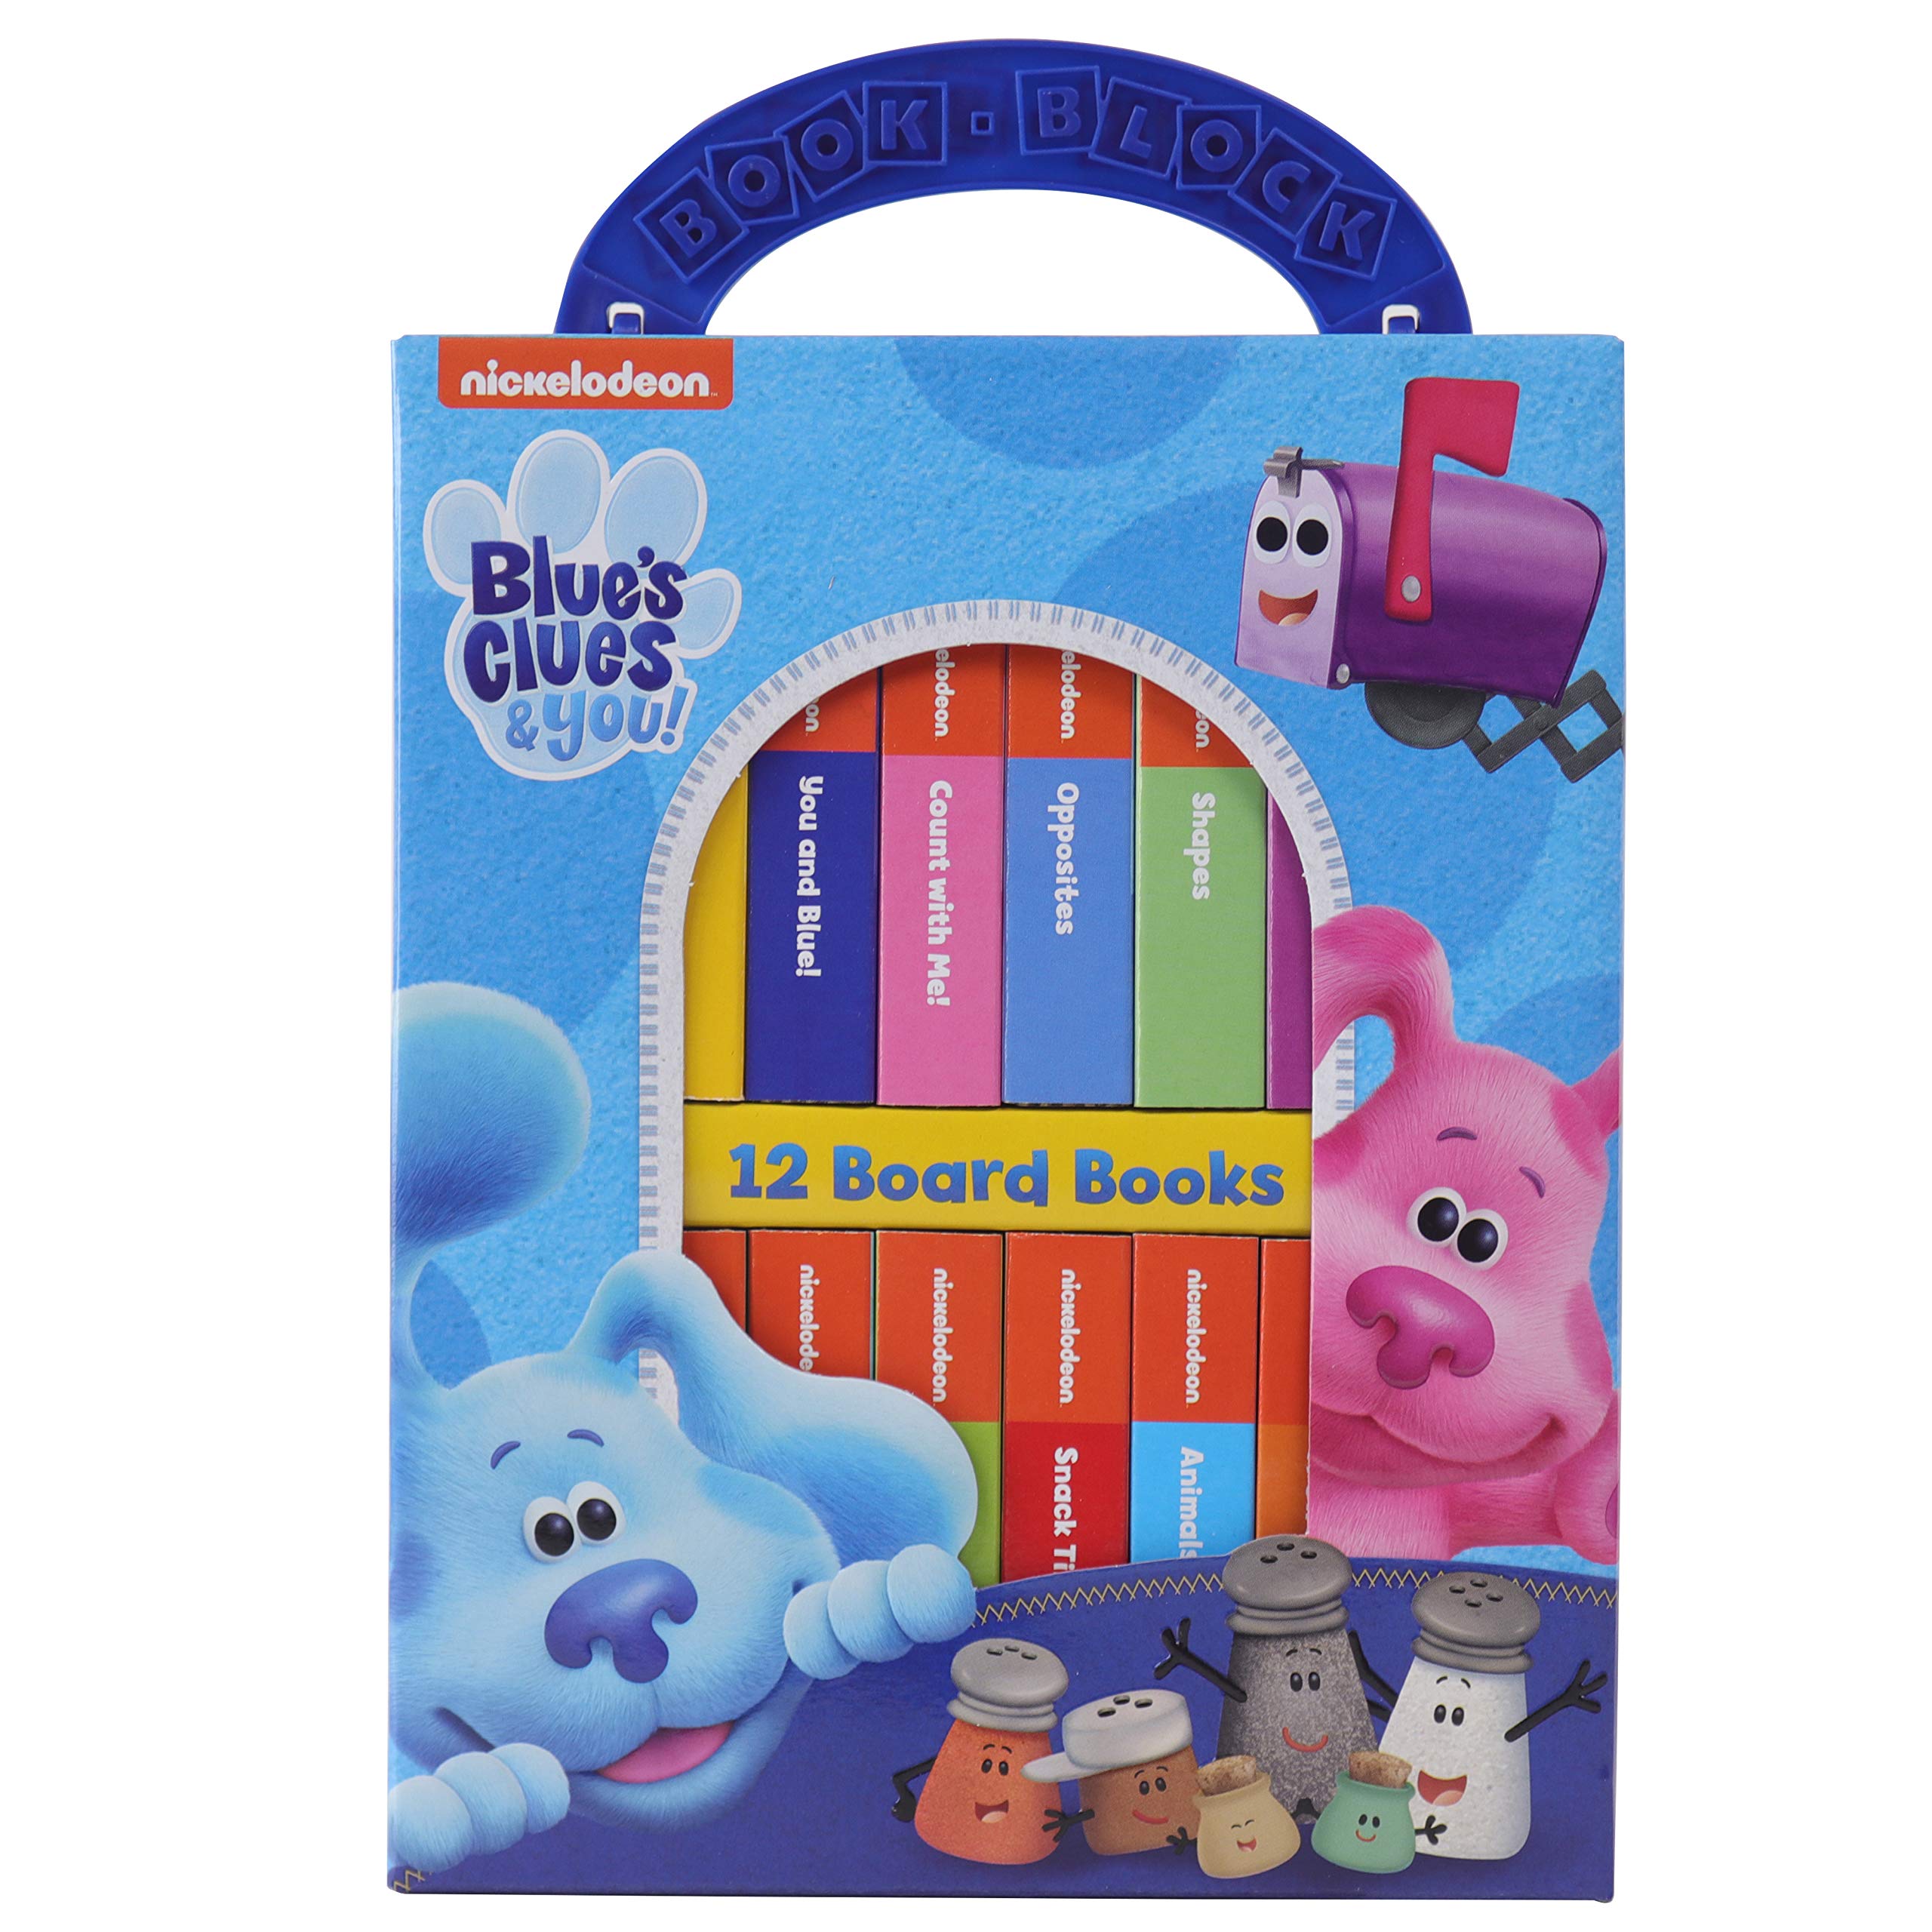 12-Book My First Library Kids' Board Book Block Set: Blue's Clues & You or Disney Puppy Dog Pals $8.70 Each & More + FS w/ Amazon Prime or FS on $25+